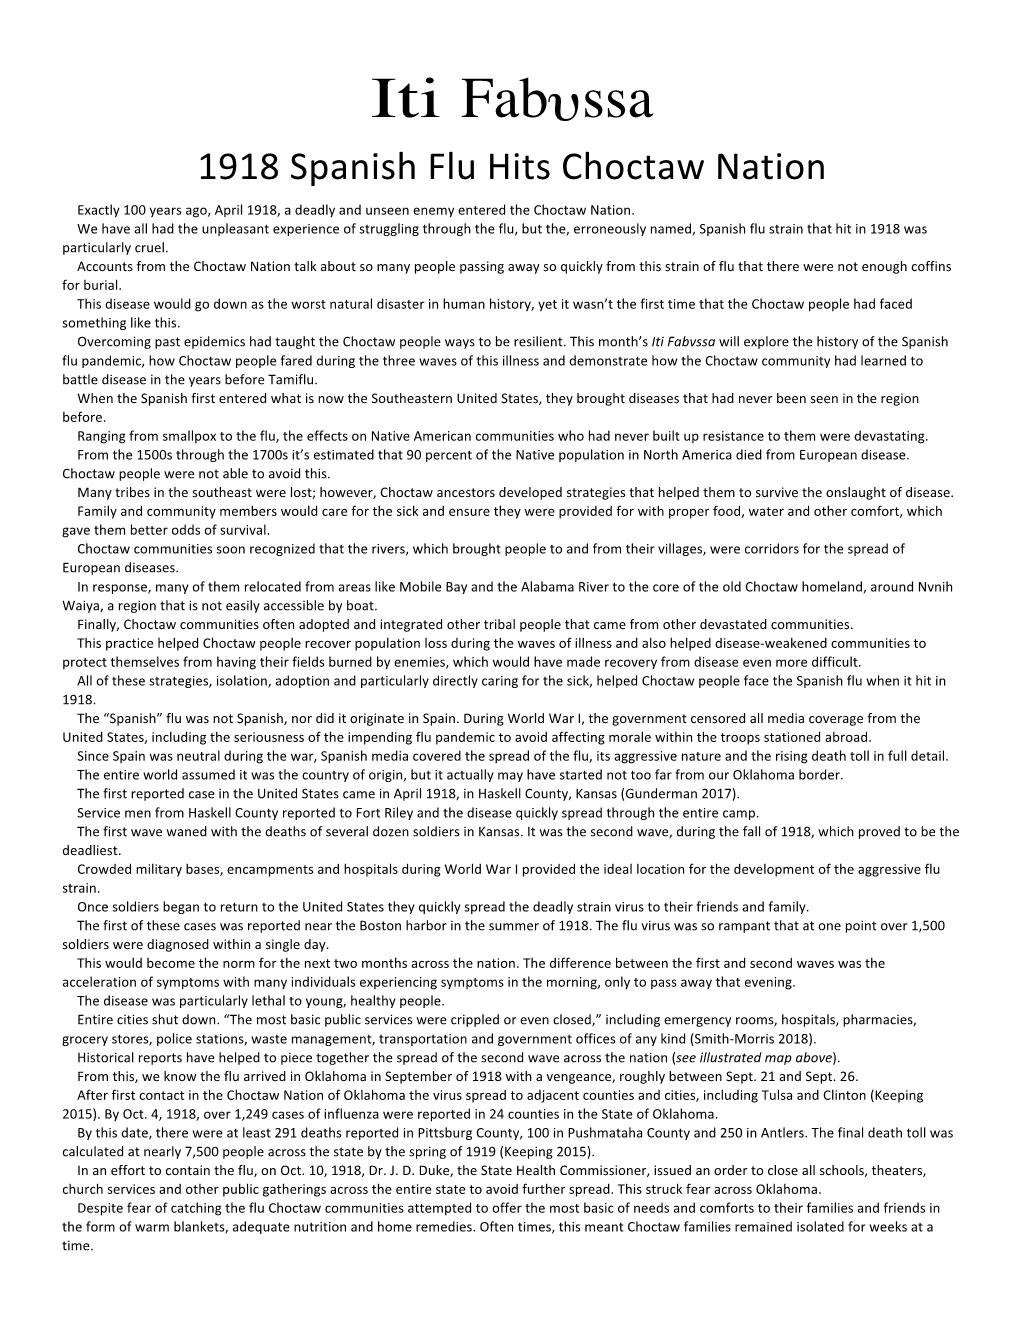 Iti Fabυssa 1918 Spanish Flu Hits Choctaw Nation Exactly 100 Years Ago, April 1918, a Deadly and Unseen Enemy Entered the Choctaw Nation